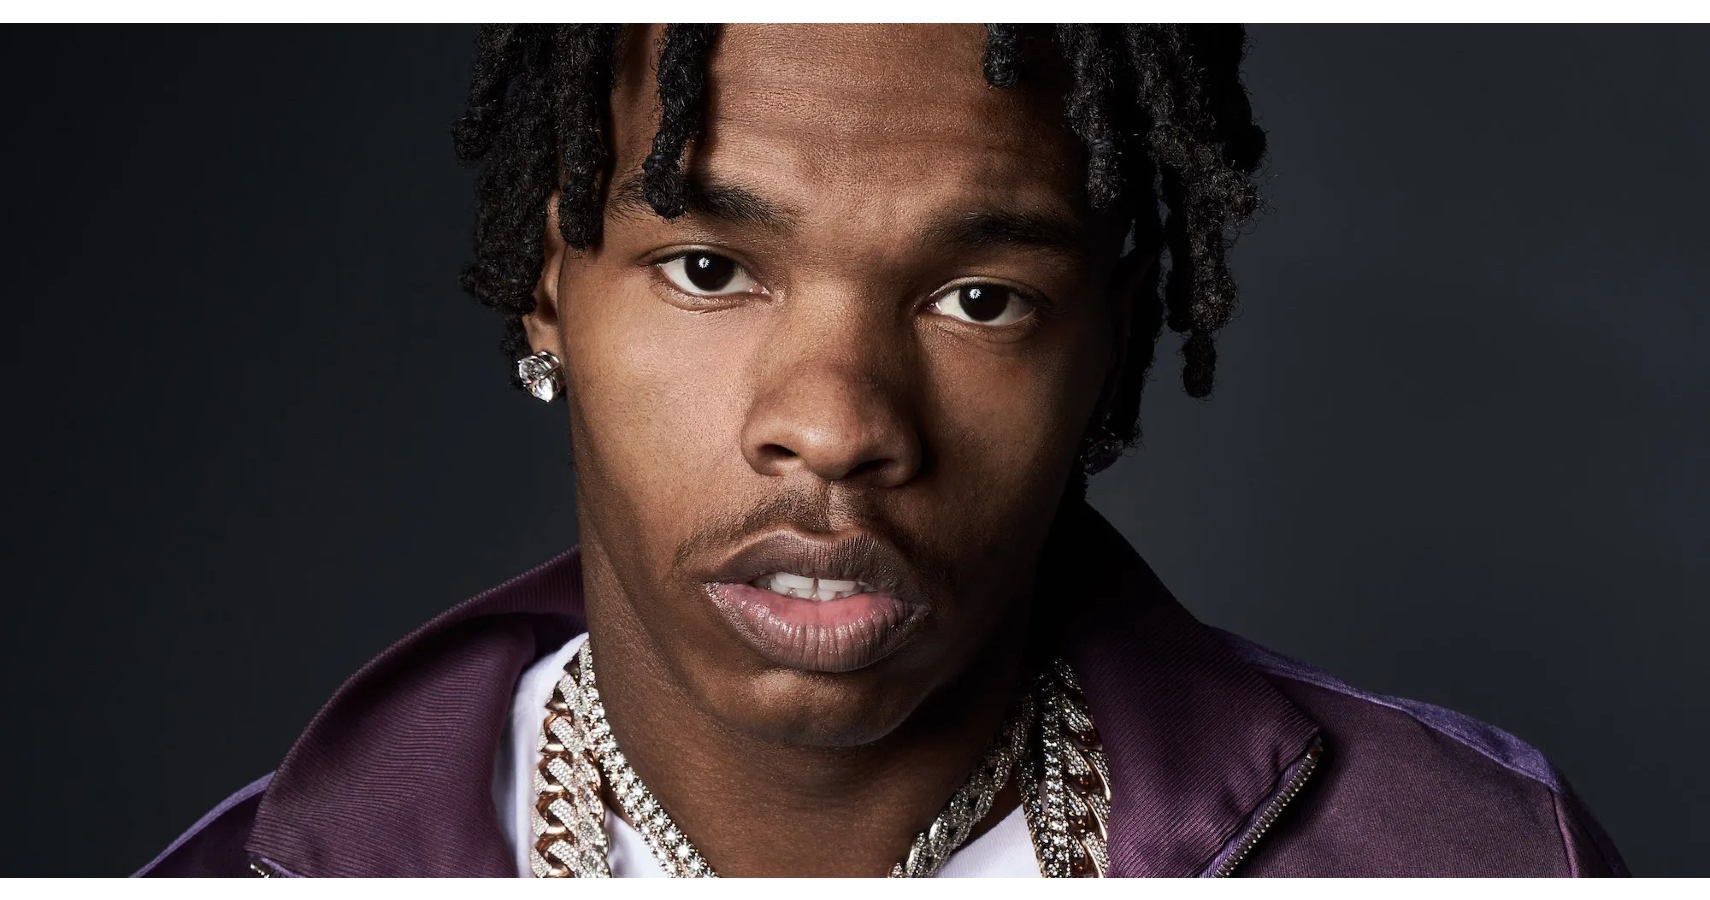 Lil Baby Lose Over 600,000 In Gambling For One Night With Drake